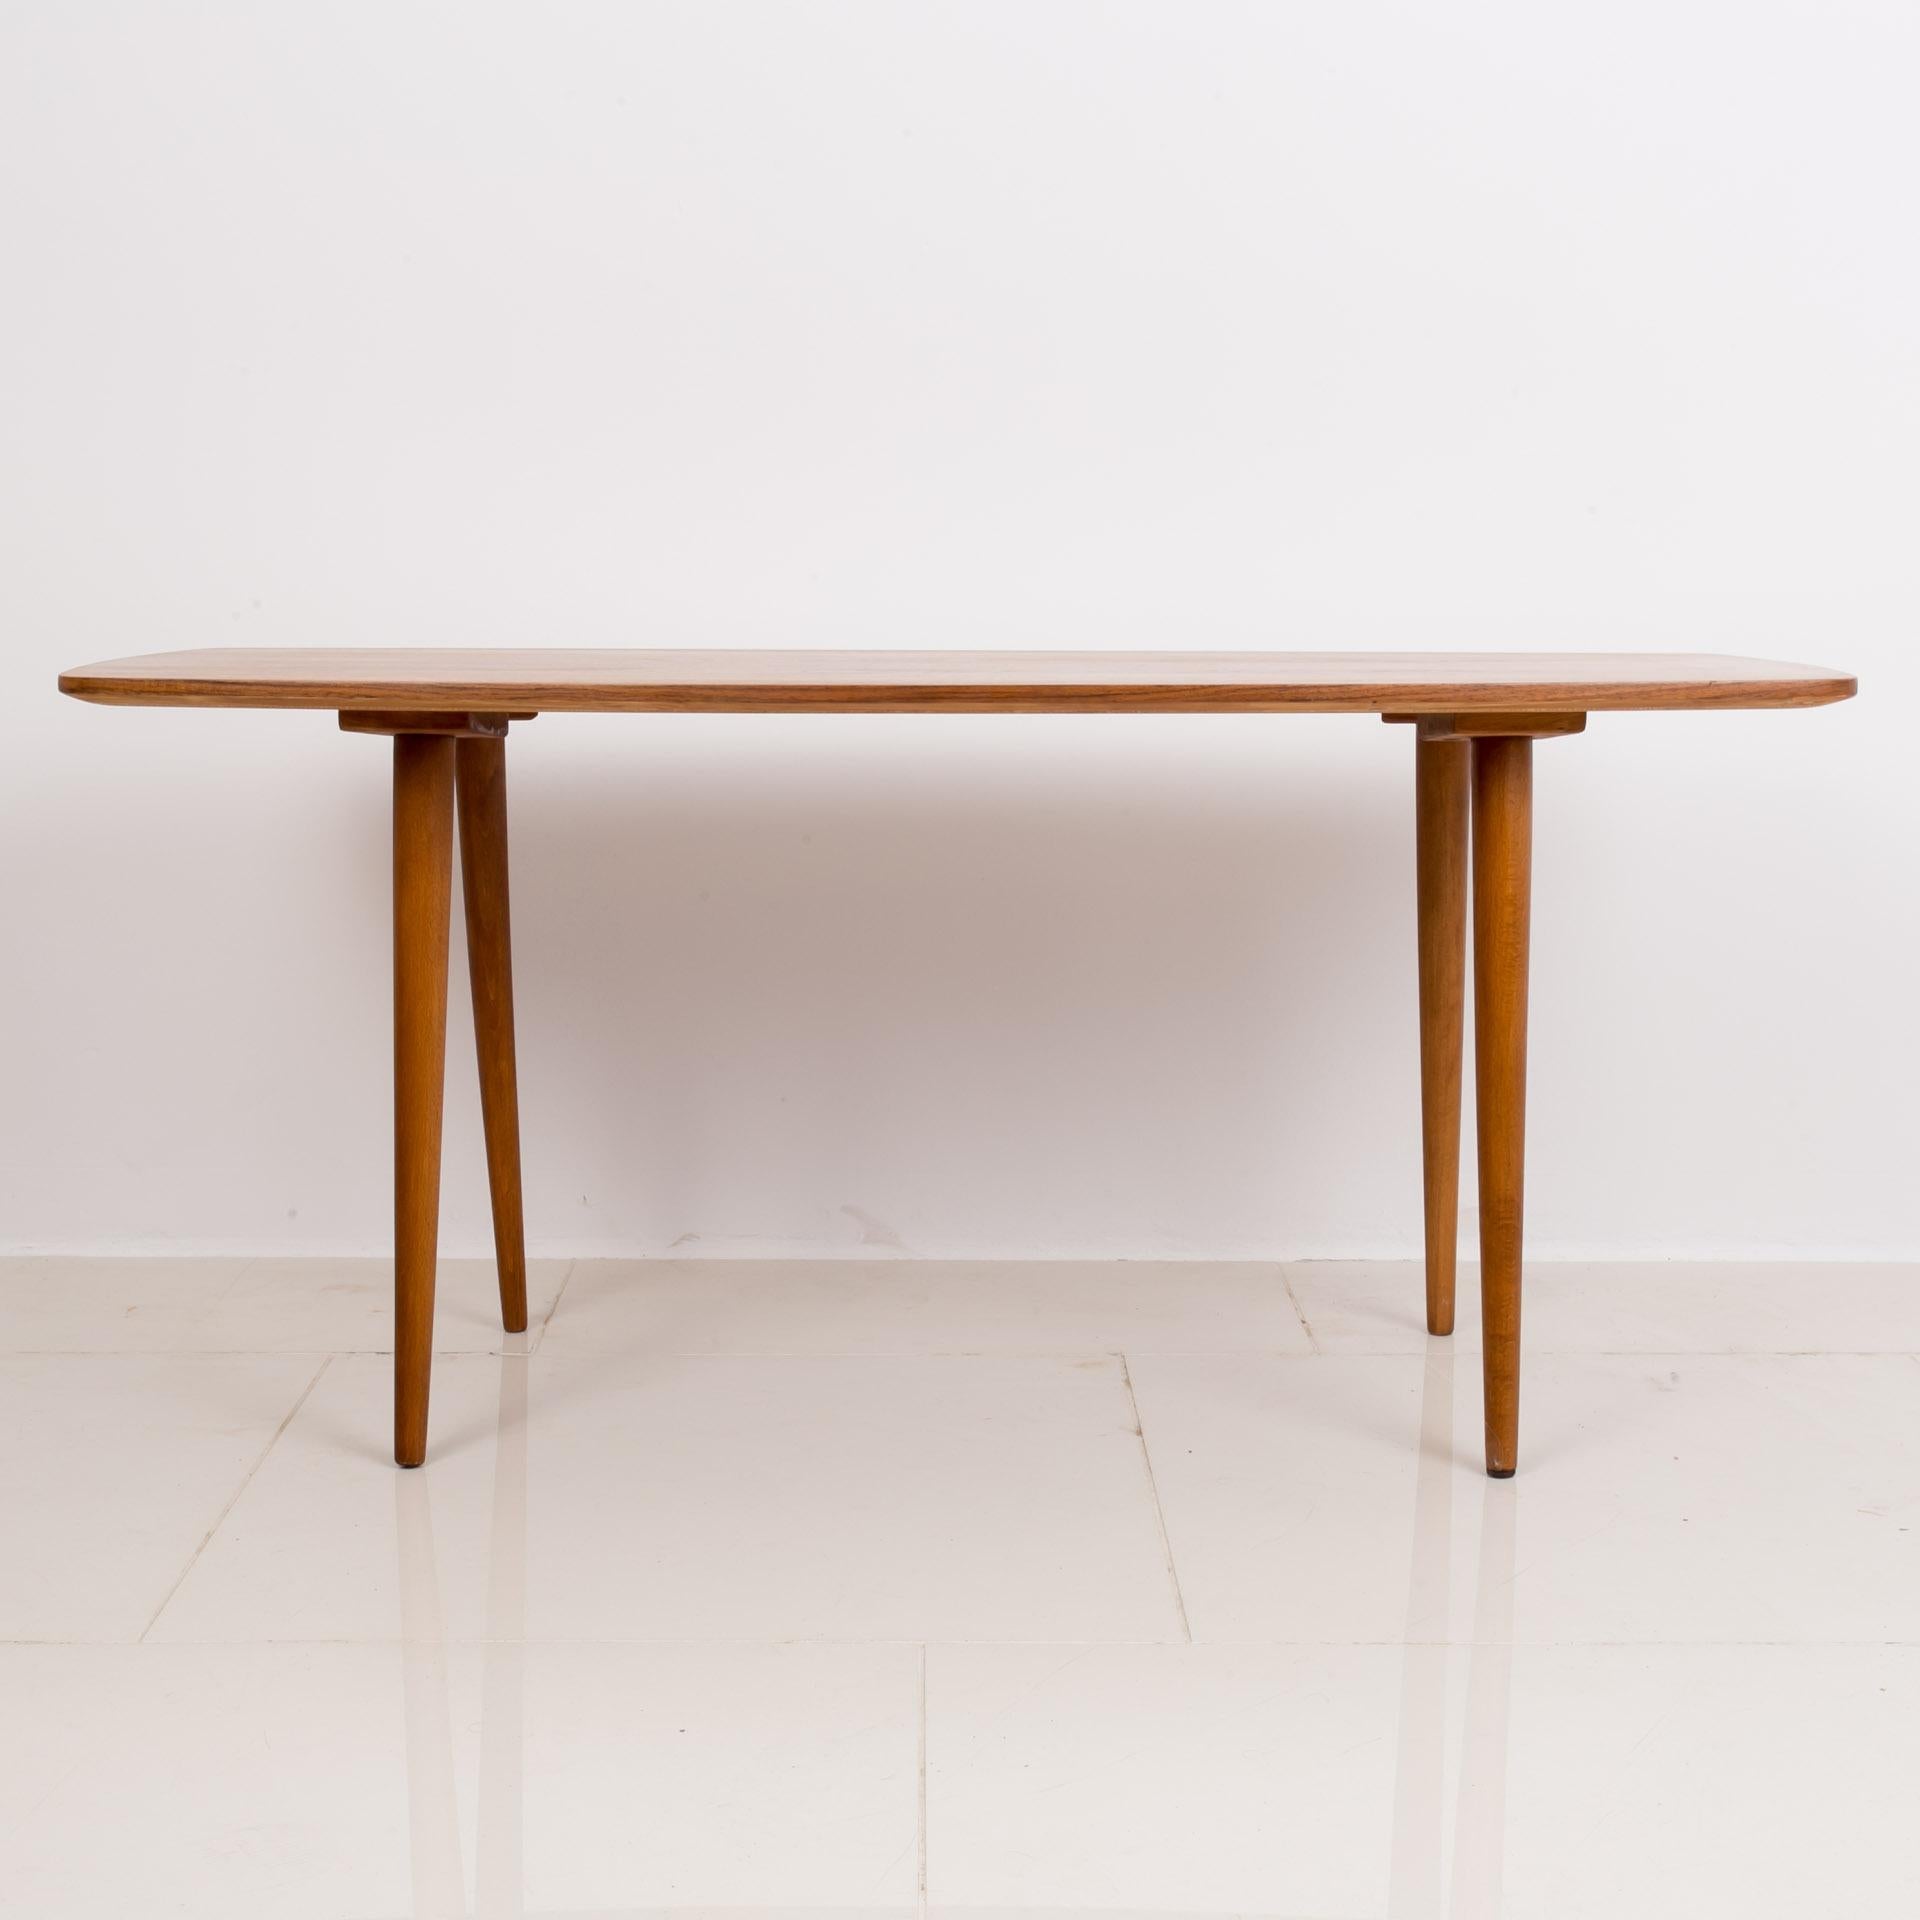 This beautiful coffee table was made in Czechoslovakia in 1950s by famous manufacturer Jitona. It features 4 slender legs, which was a typical element of furniture in those years. It is made of beech wood and the table top is veneered with walnut